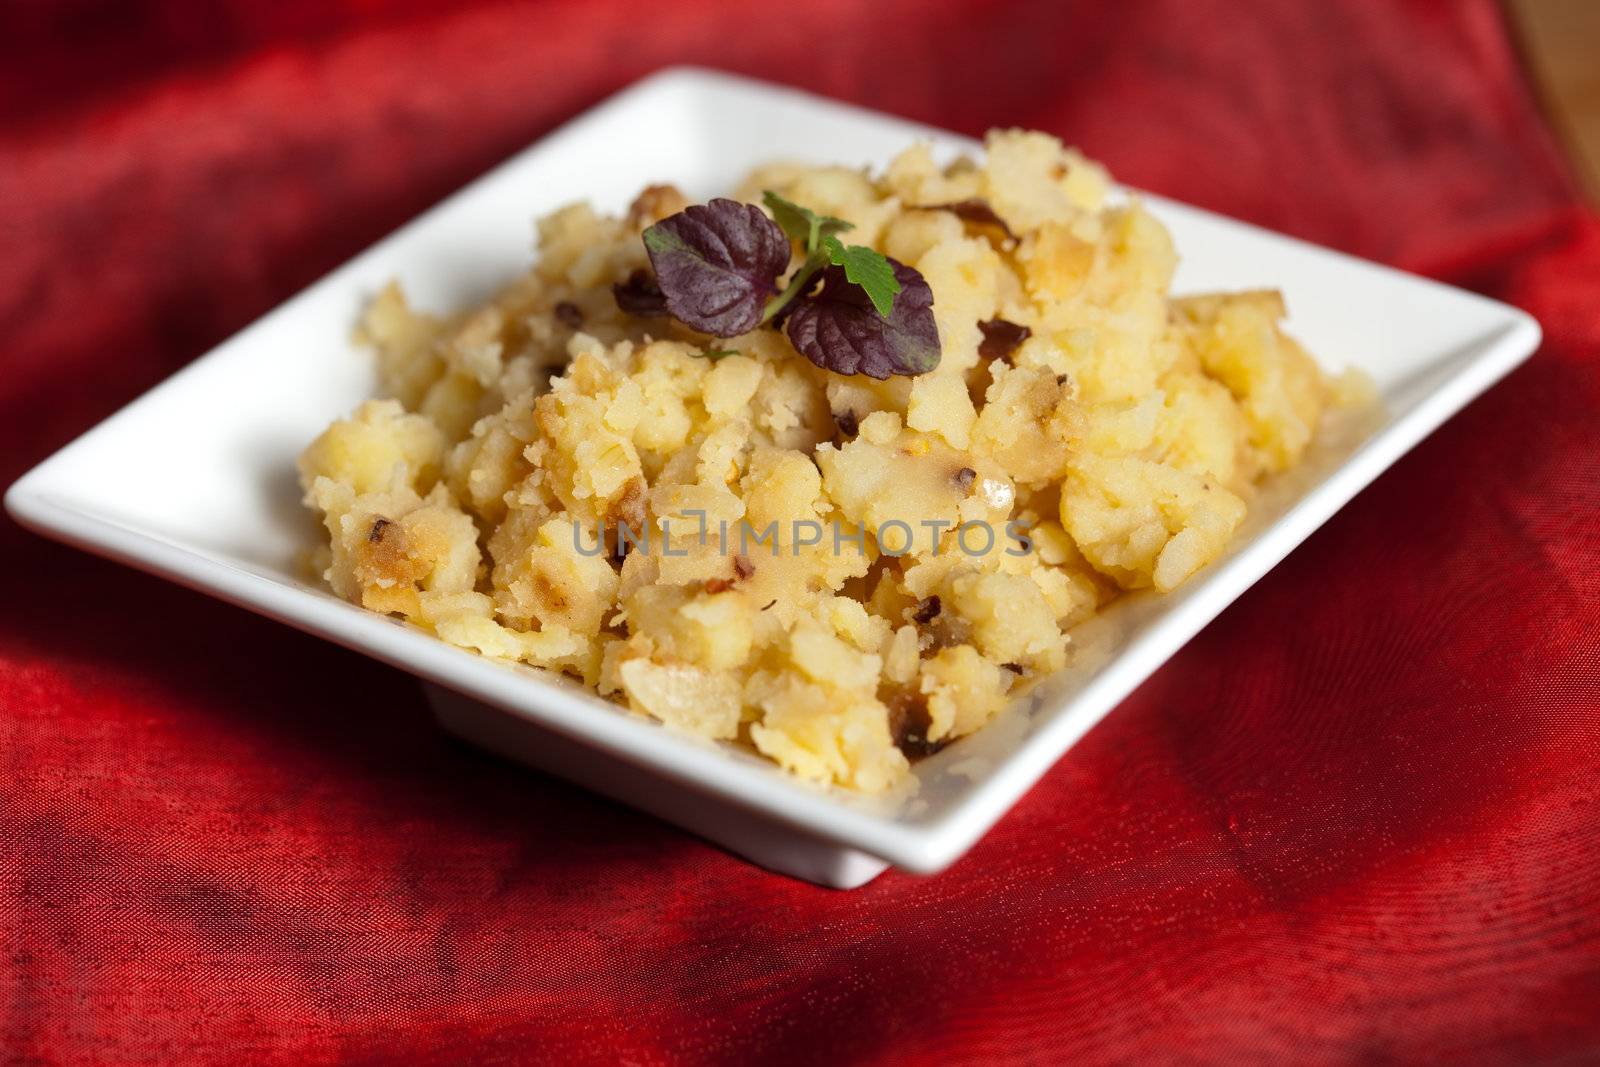 Typical indian style potato dish